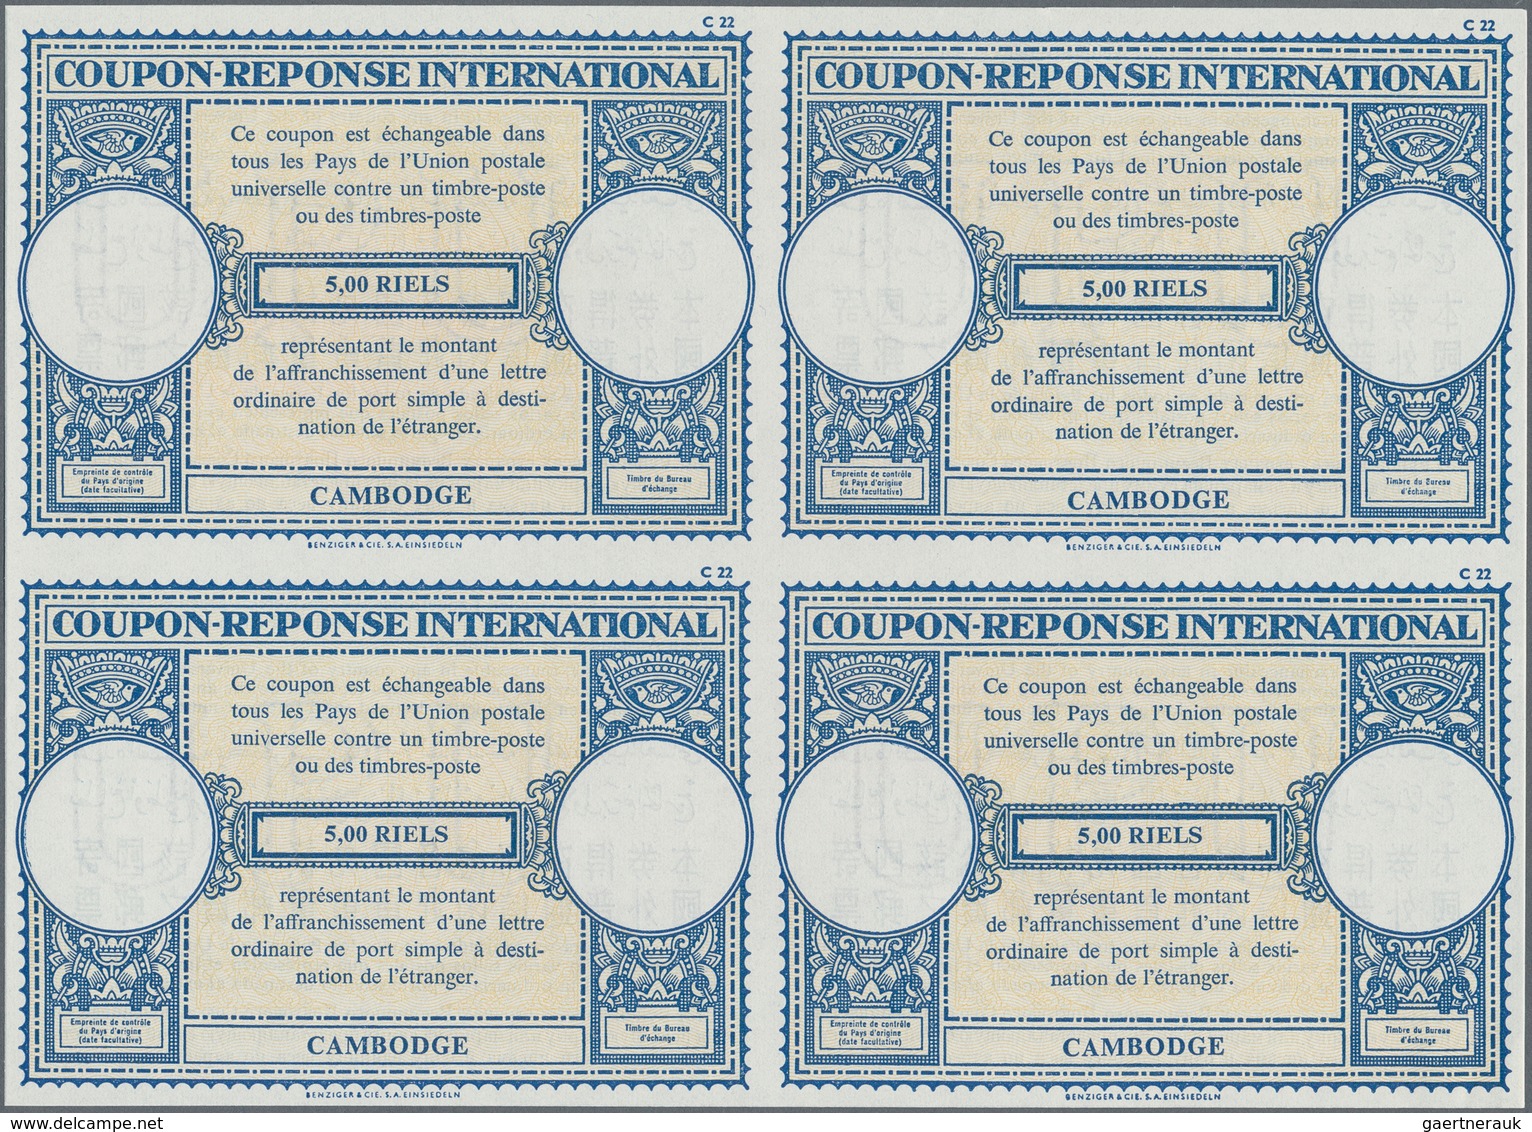 Kambodscha: 1955 (approx). International Reply Coupon 5,00 Riels (London Type) In An Unused Block Of - Cambodge